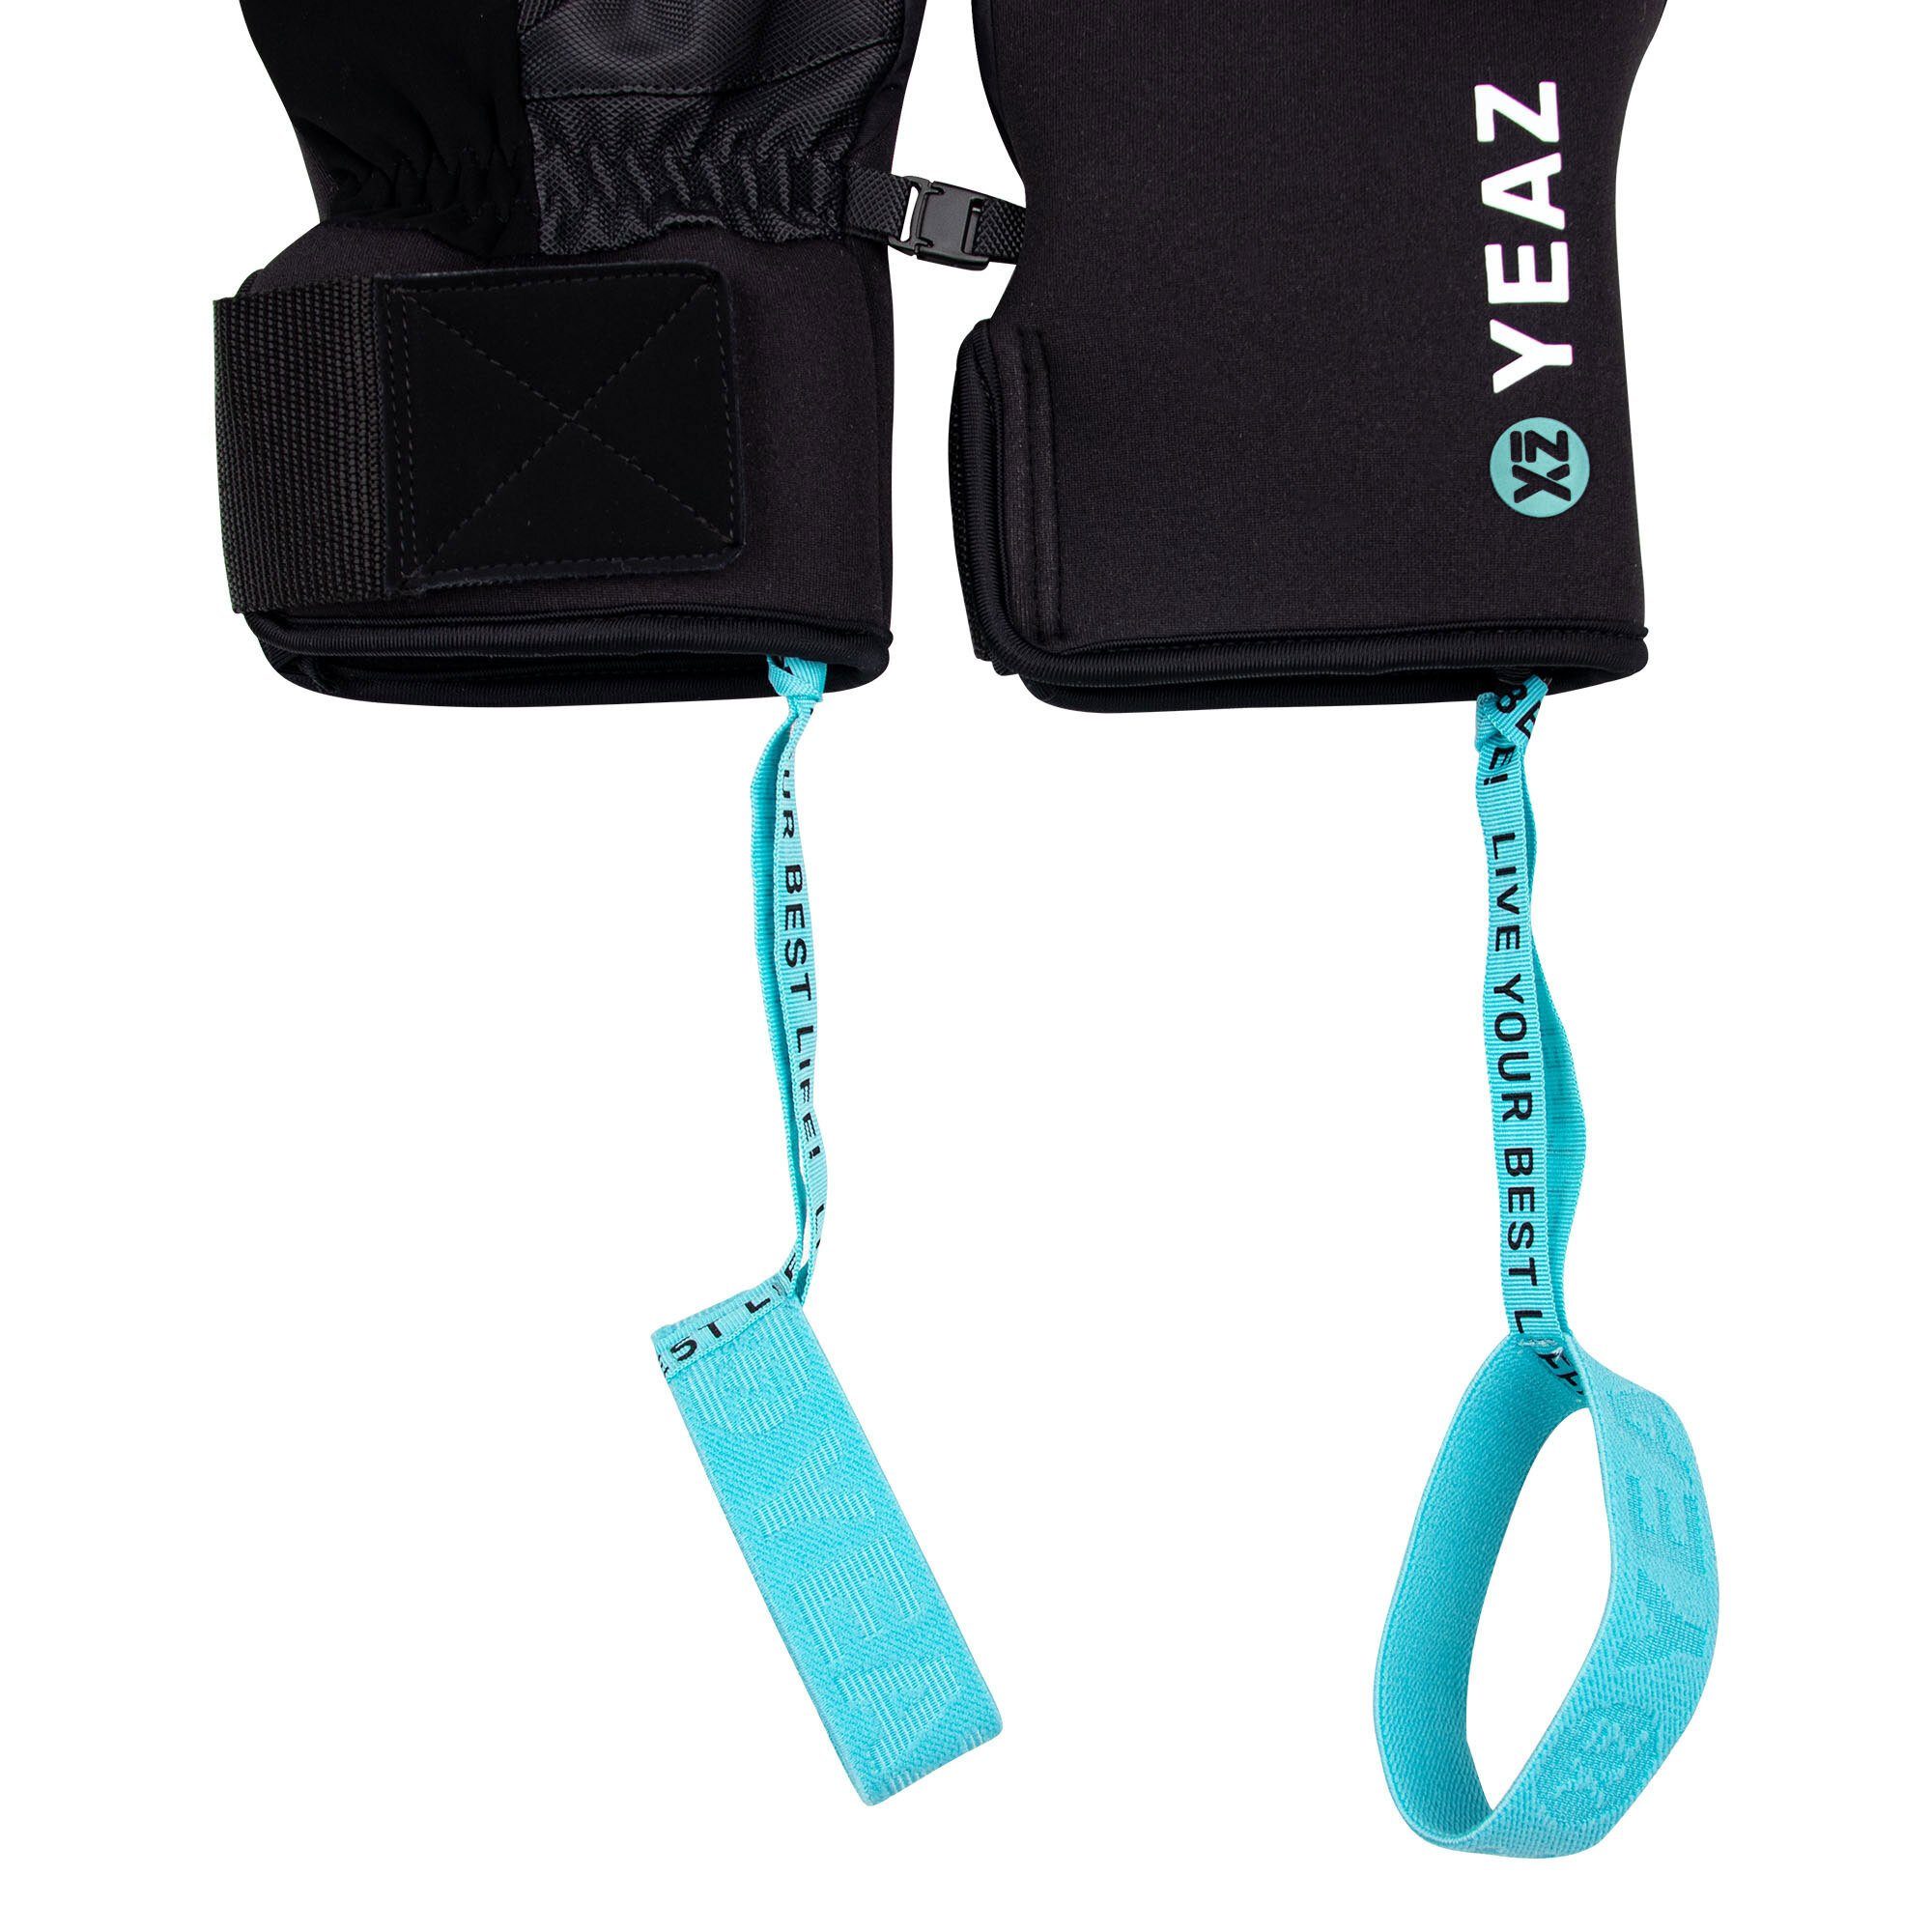 POW Touch-Funktion YEAZ Skihandschuhe & fausthandschuhe Wrist-Band